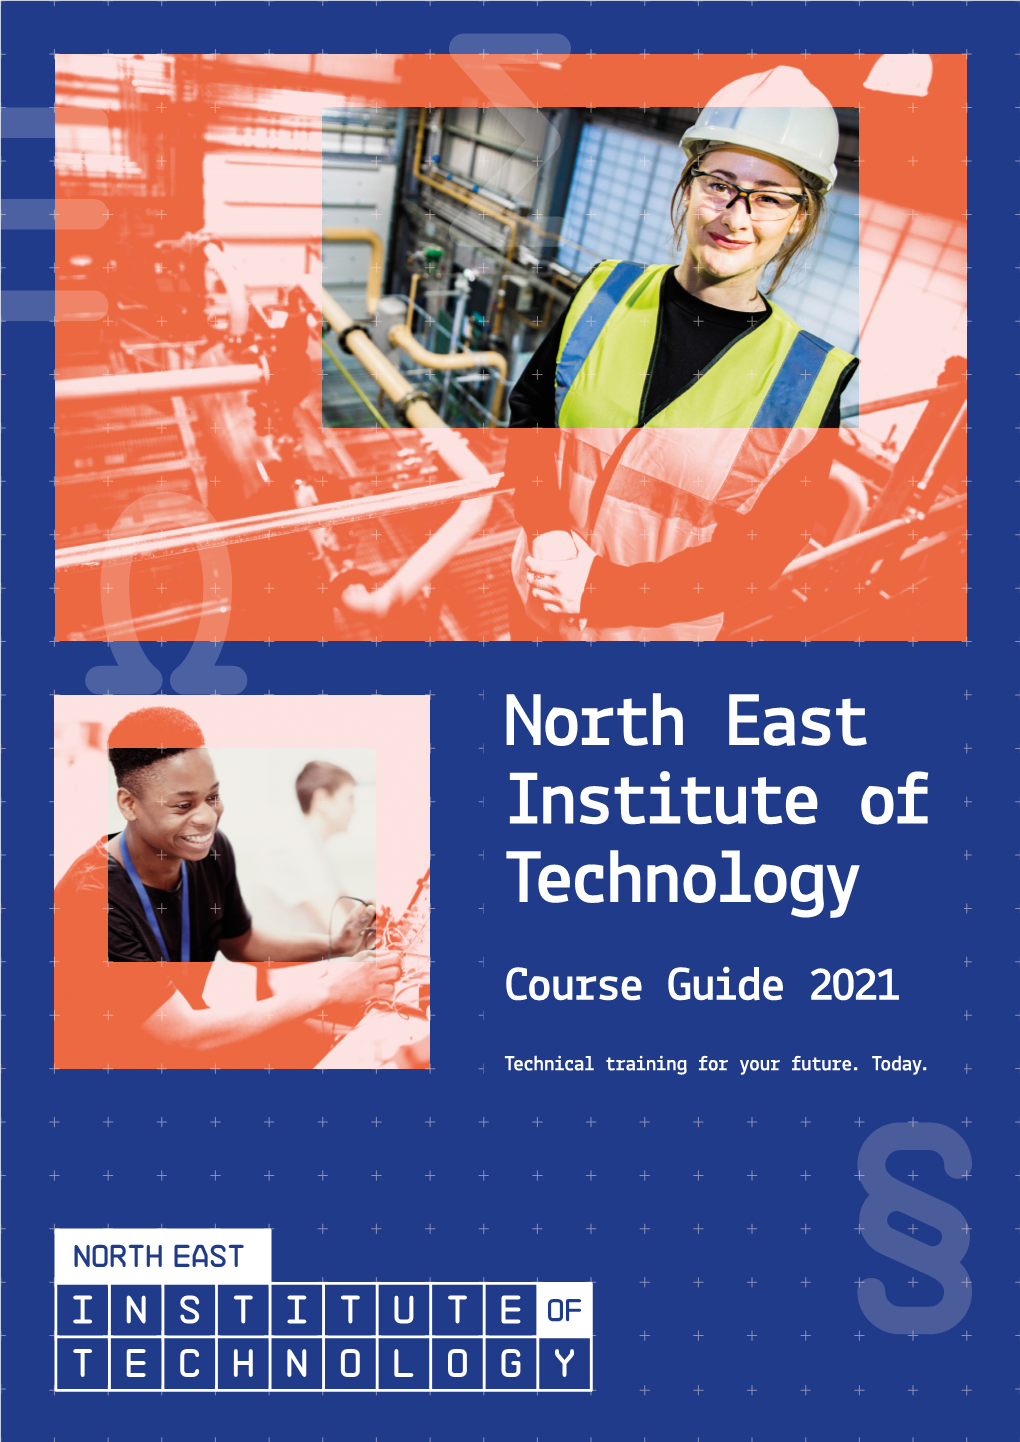 North East Institute of Technology Course Guide 2021